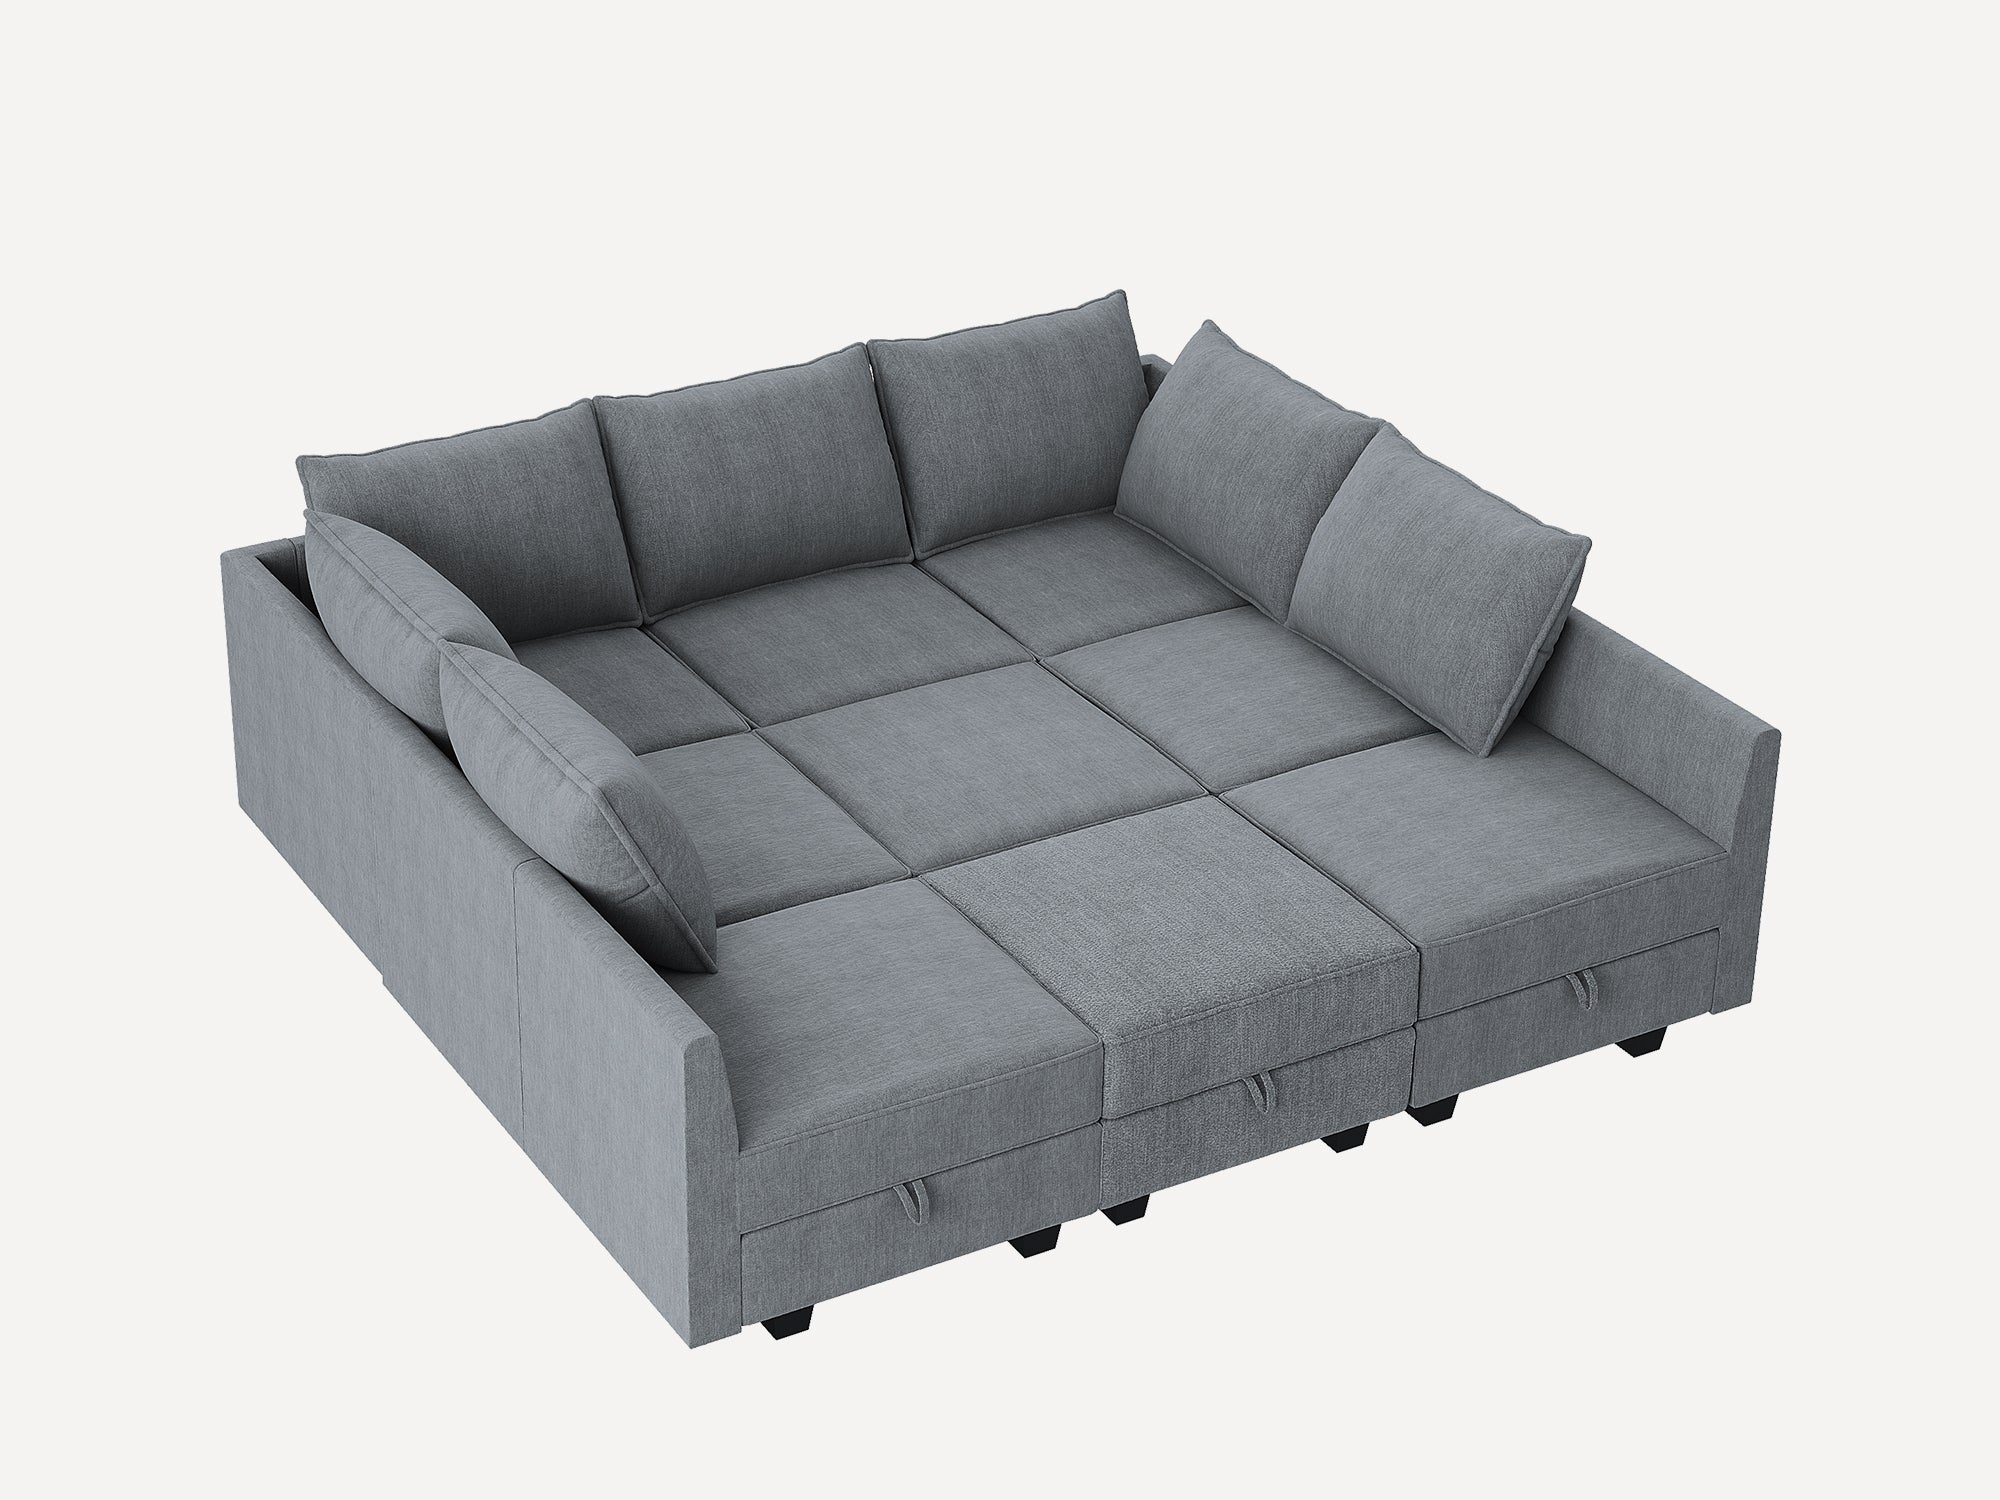 HONBAY Polyester Modular Sleeper Sectional With Storage Seat